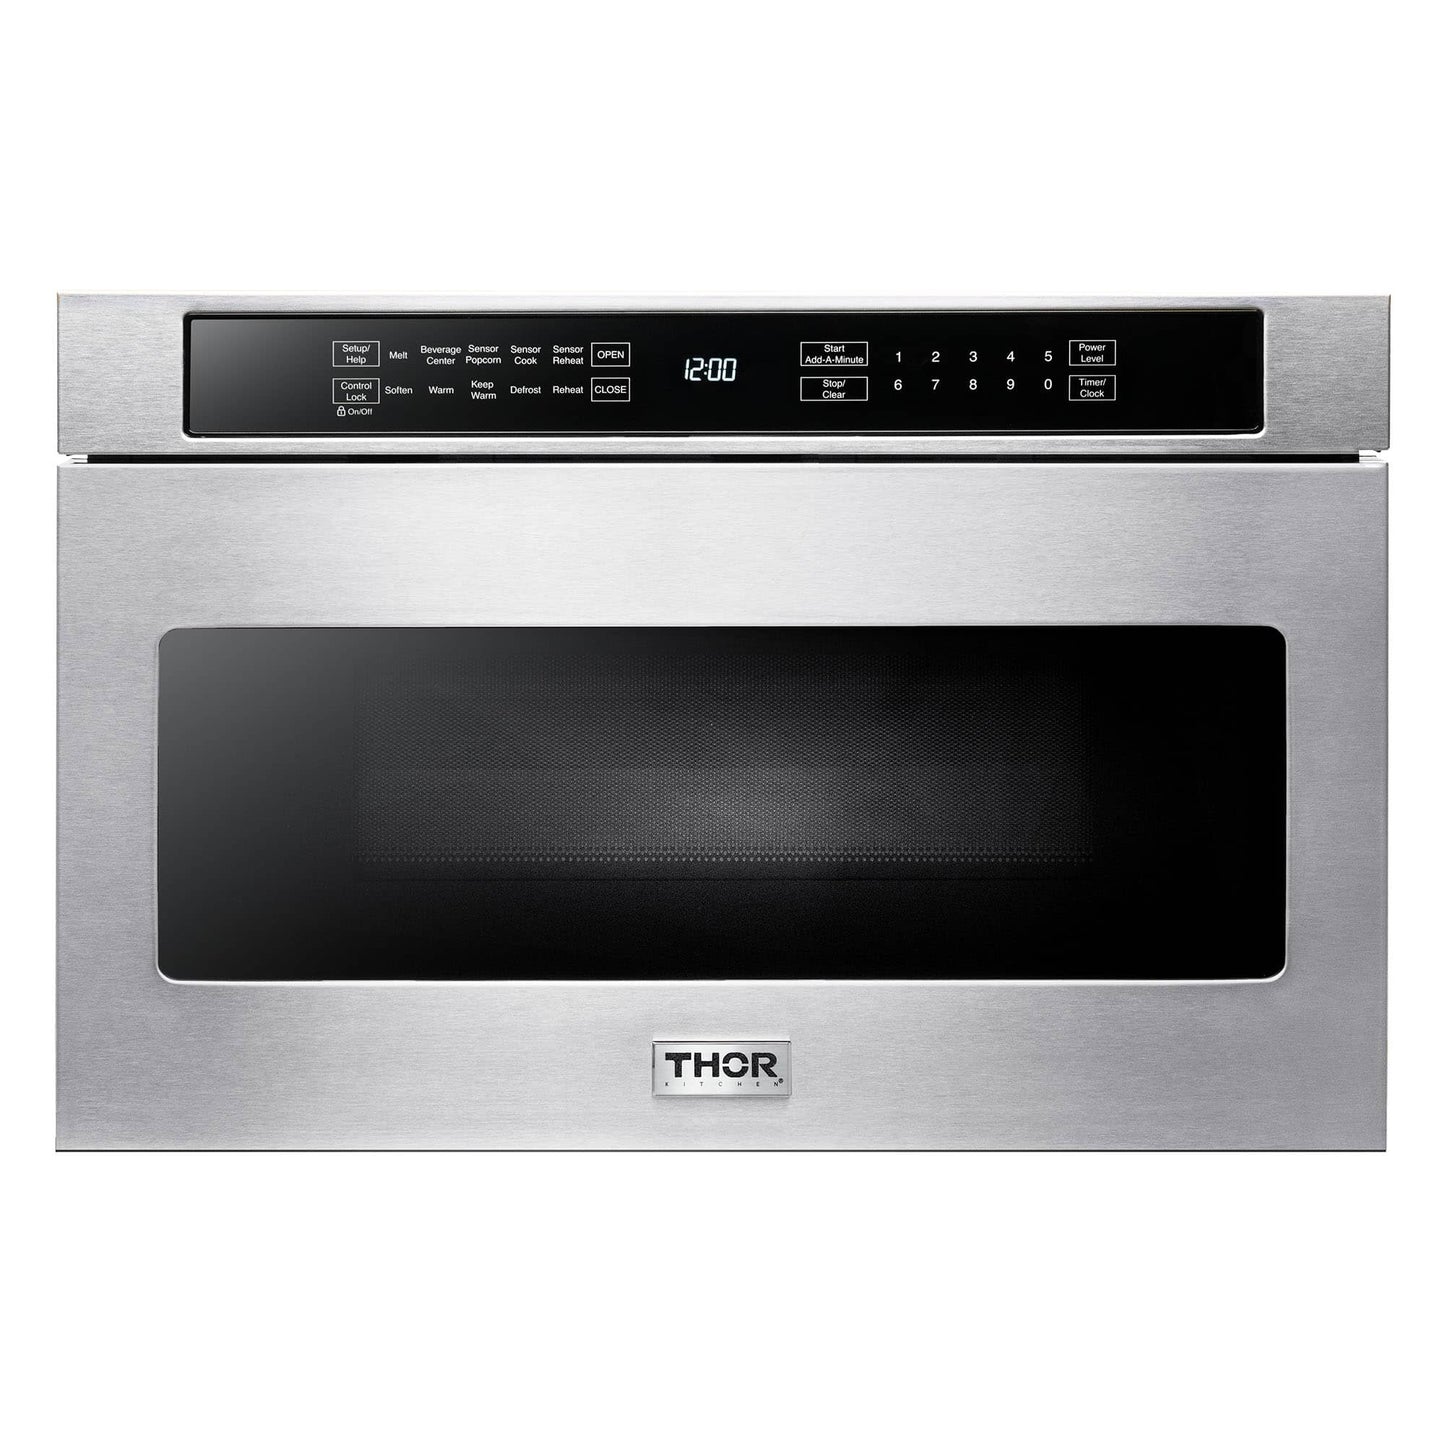 Thor Kitchen 5-Piece Appliance Package - 36-Inch Electric Range, French Door Refrigerator, Under Cabinet Hood, Dishwasher, and Microwave Drawer in Stainless Steel